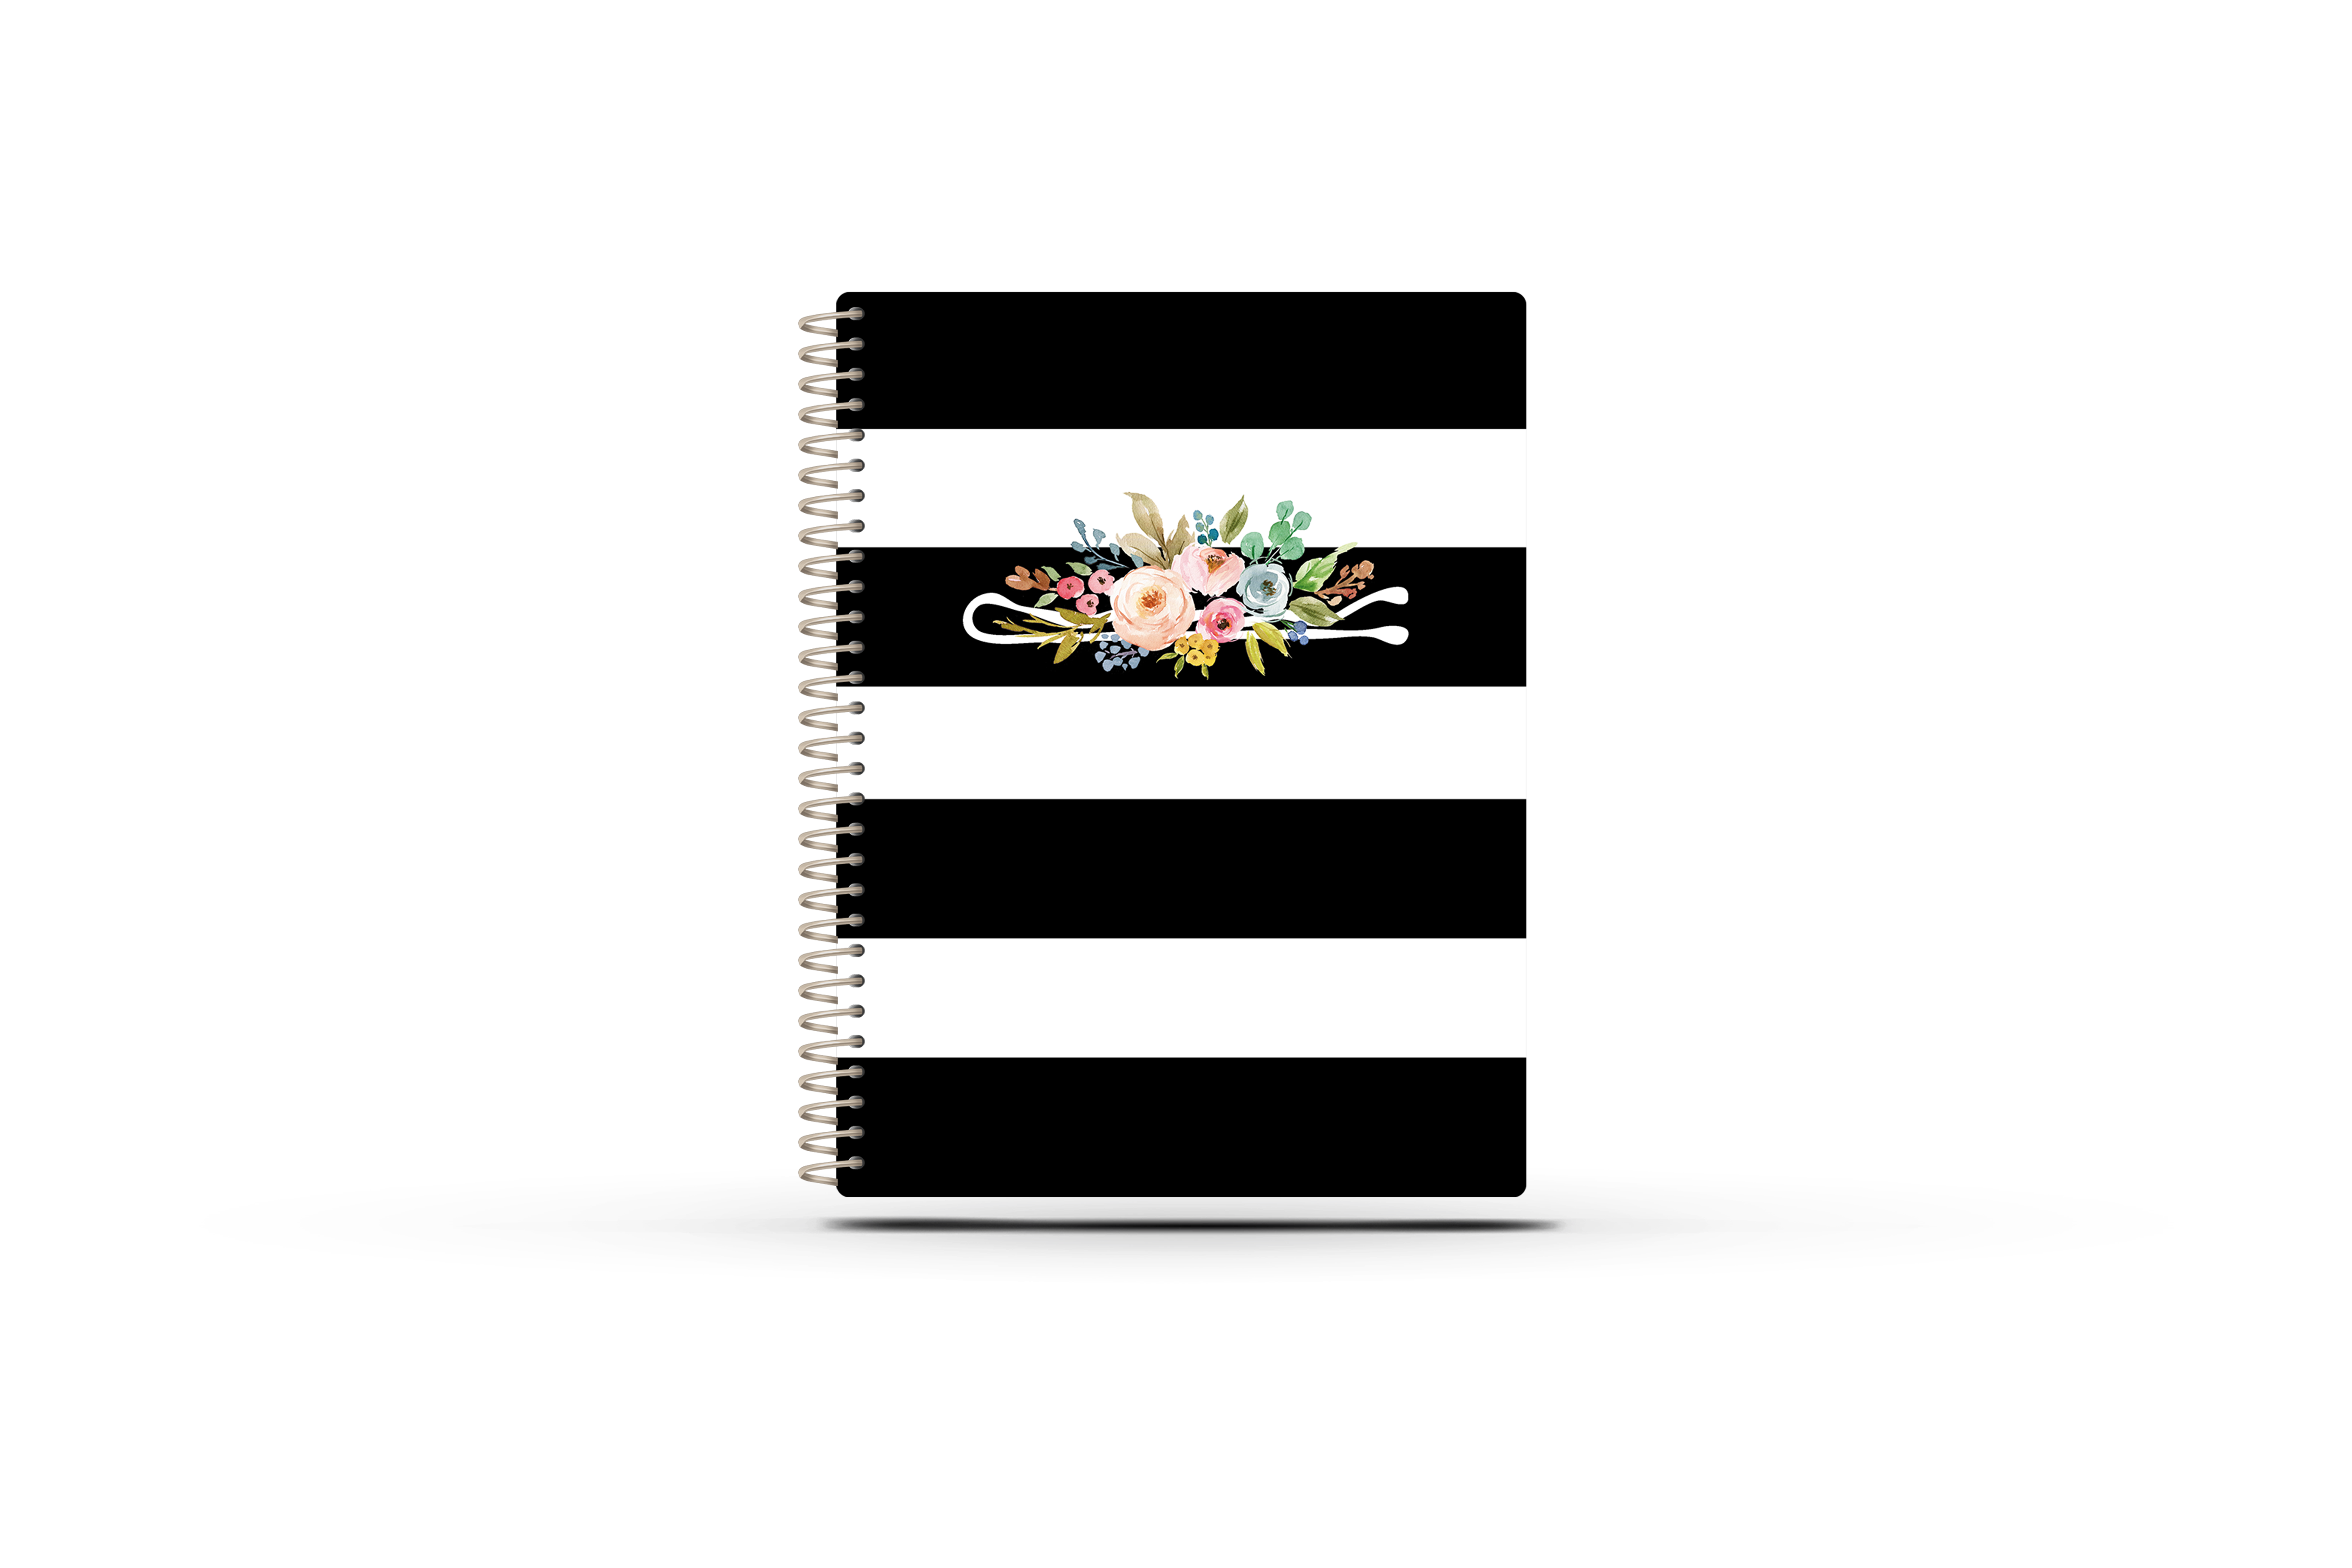 Sales Tracker -  BW STRIPPED FLORAL